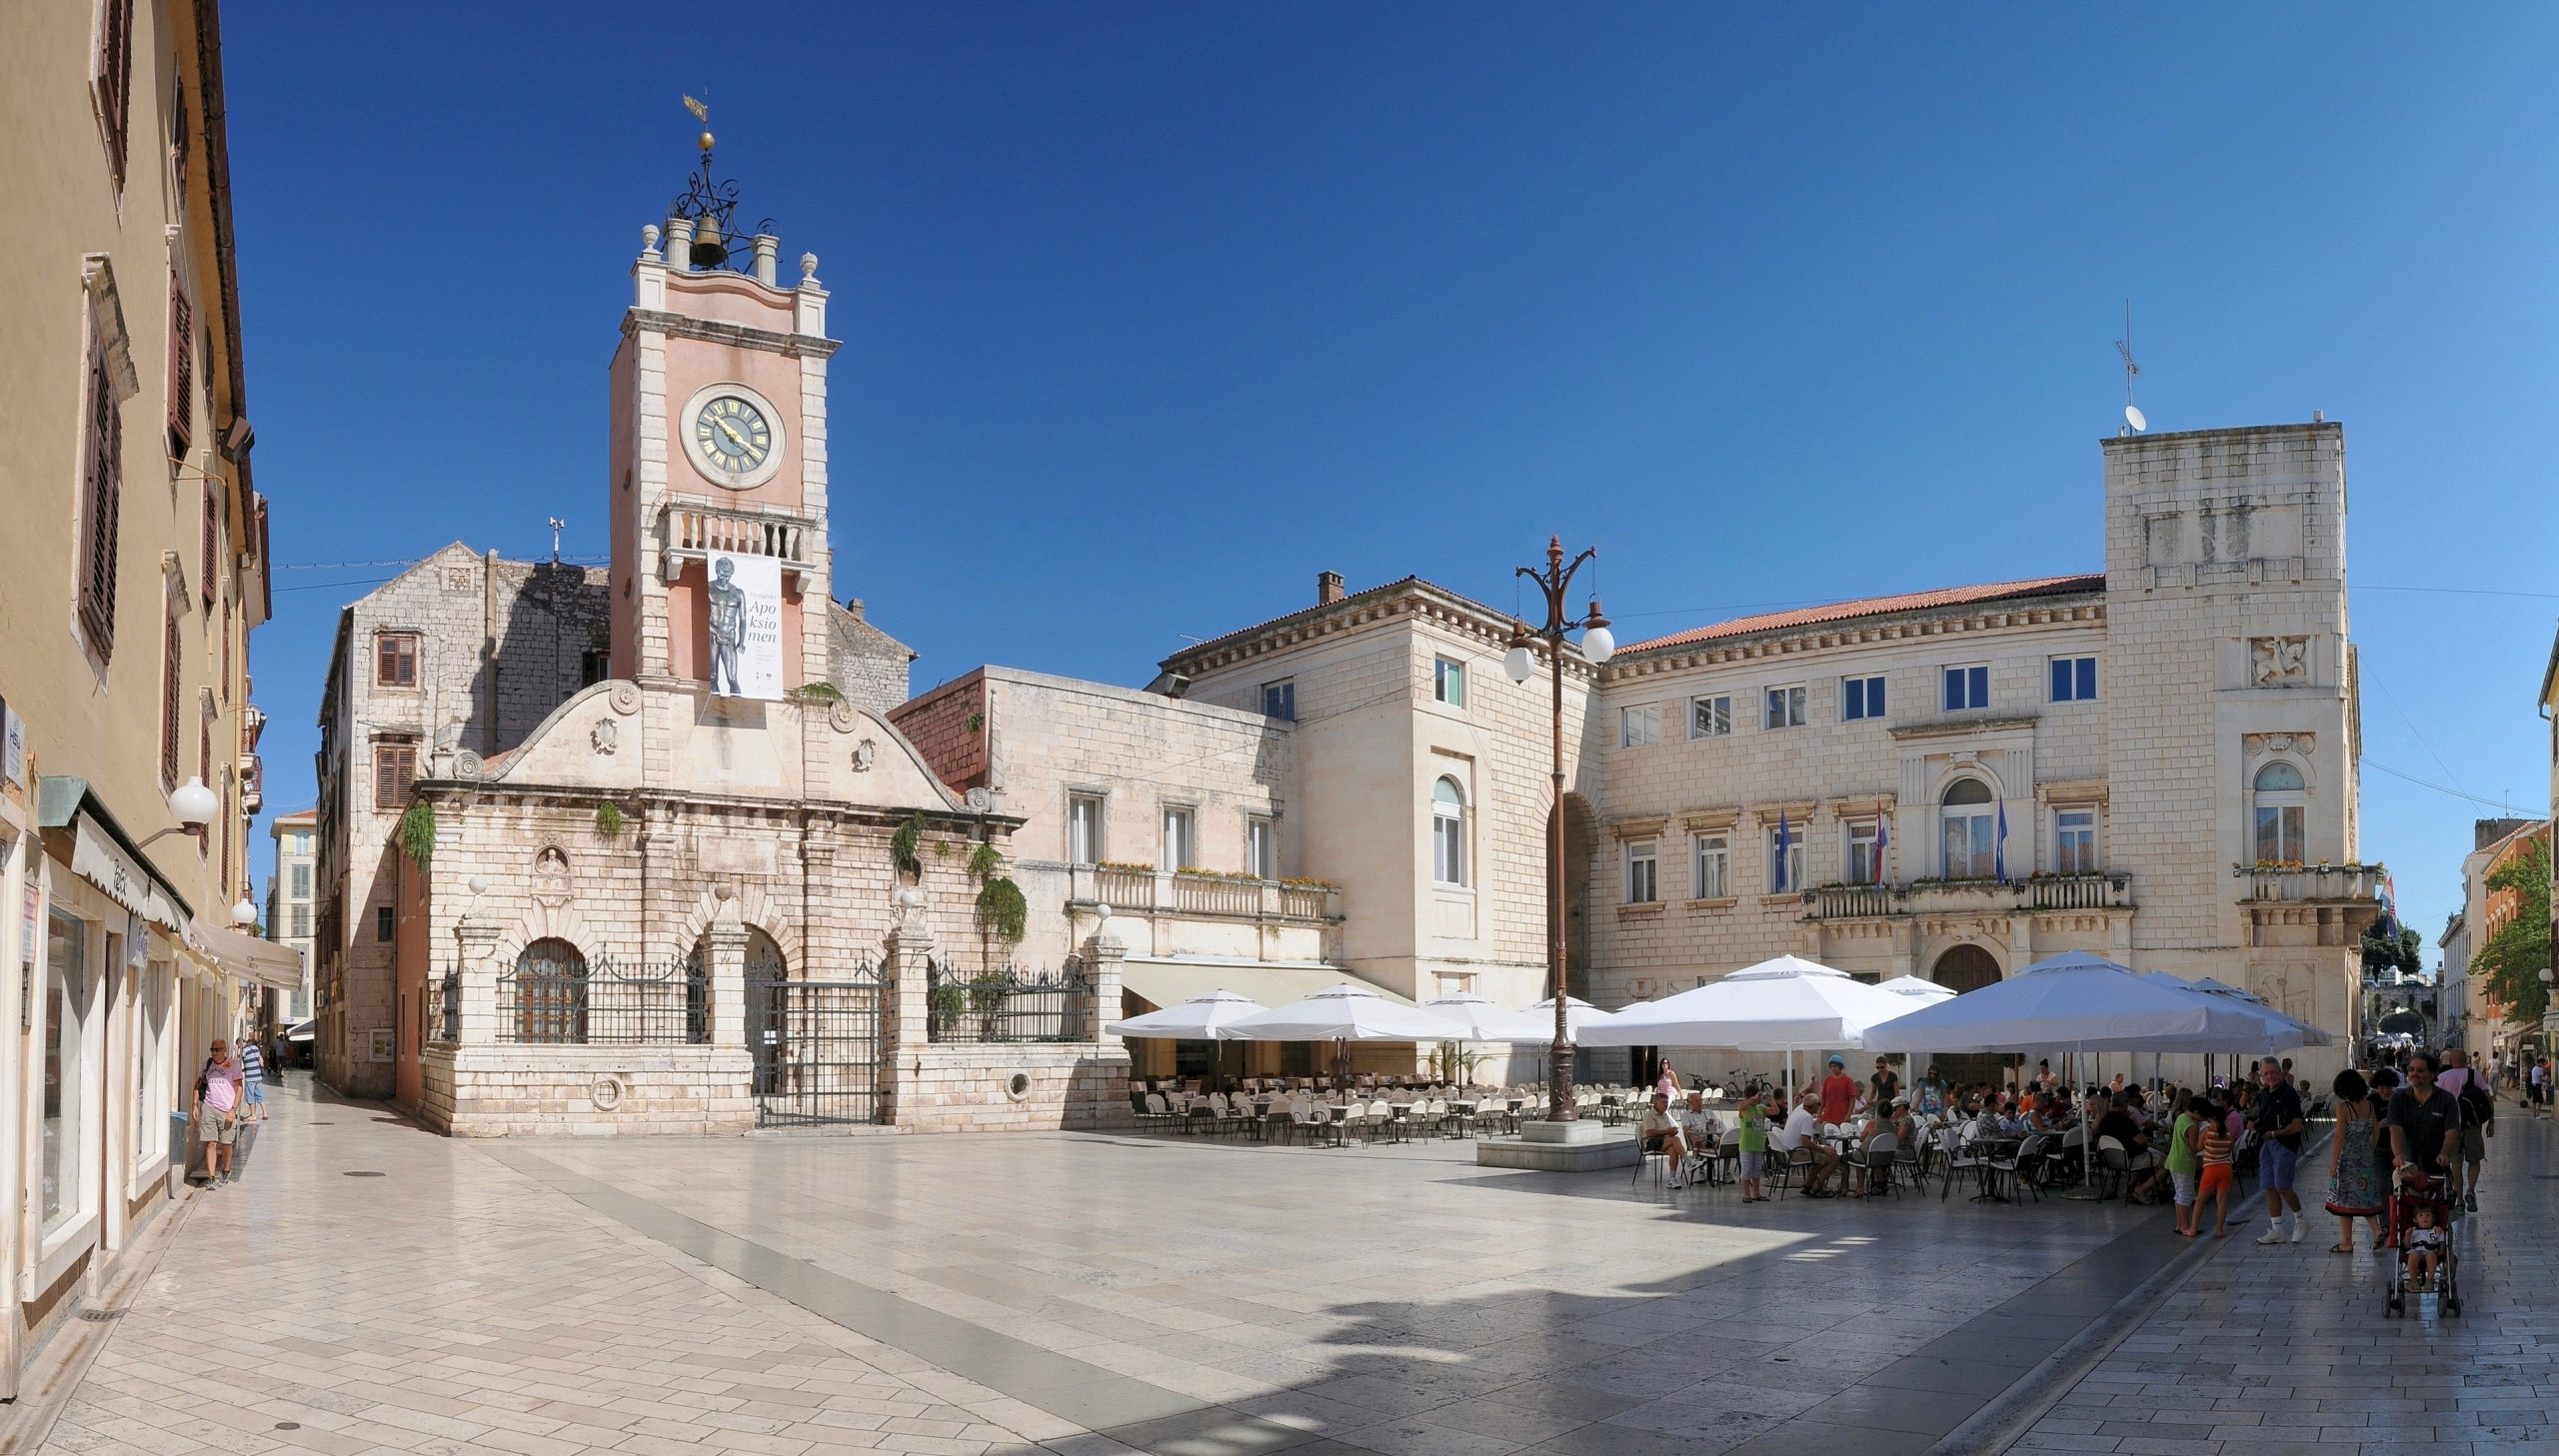 People's Square - 10 Best Tourist Attractions in Split